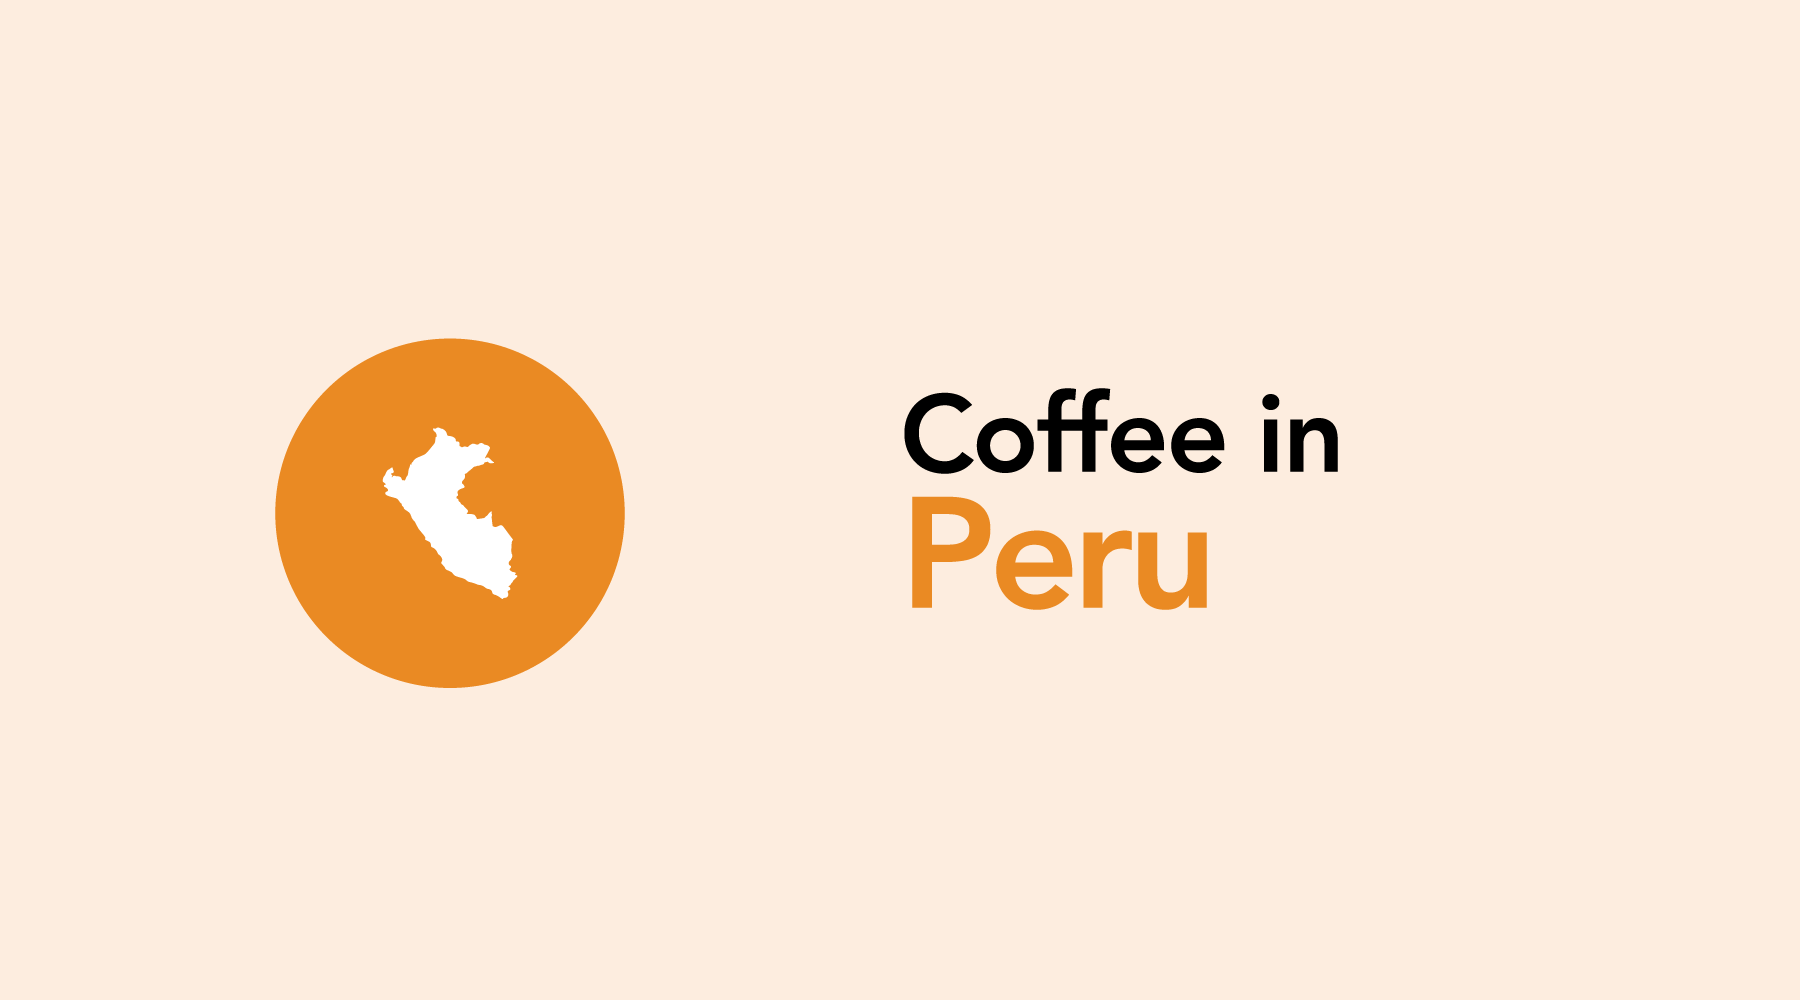 Peru | Creating Coffee Co-Ops to Improve Quality and Help Farmers